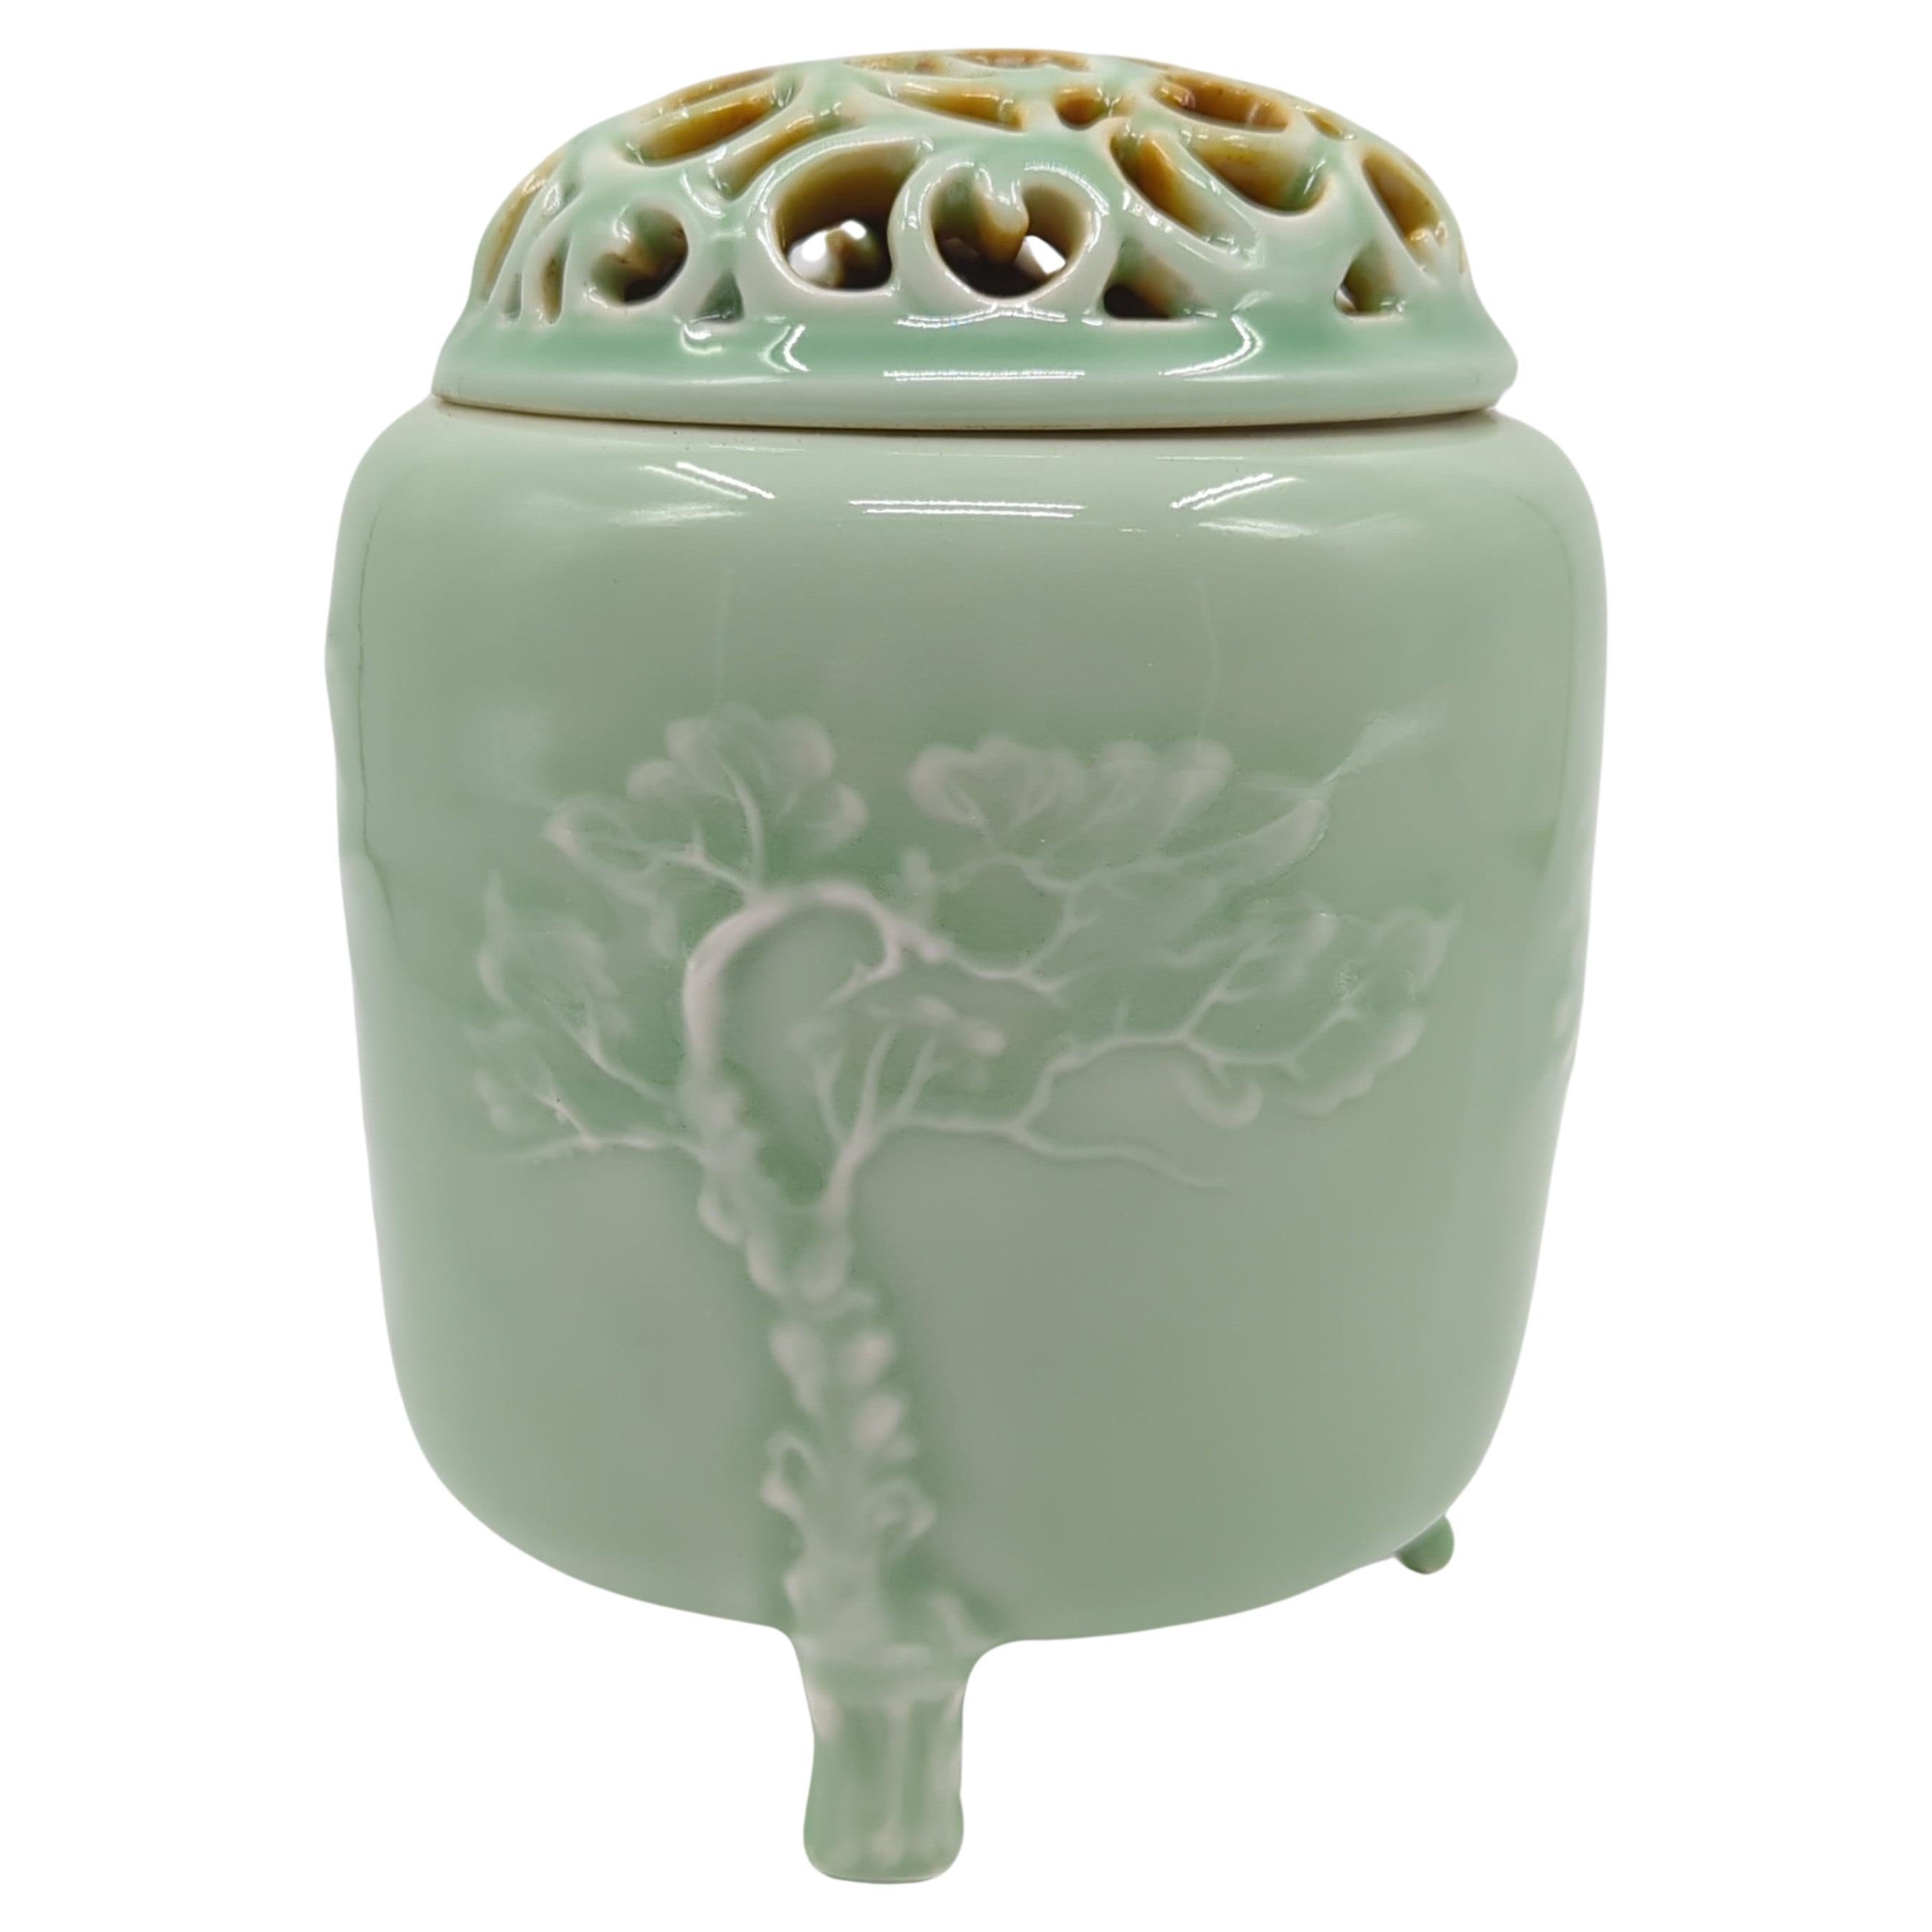 This exceptional covered censer is a testament to the art of Chinese ceramics, executed with remarkable skill and attention to detail. The piece is enveloped in a refined celadon glaze, a color revered for its jade-like subtlety and historical